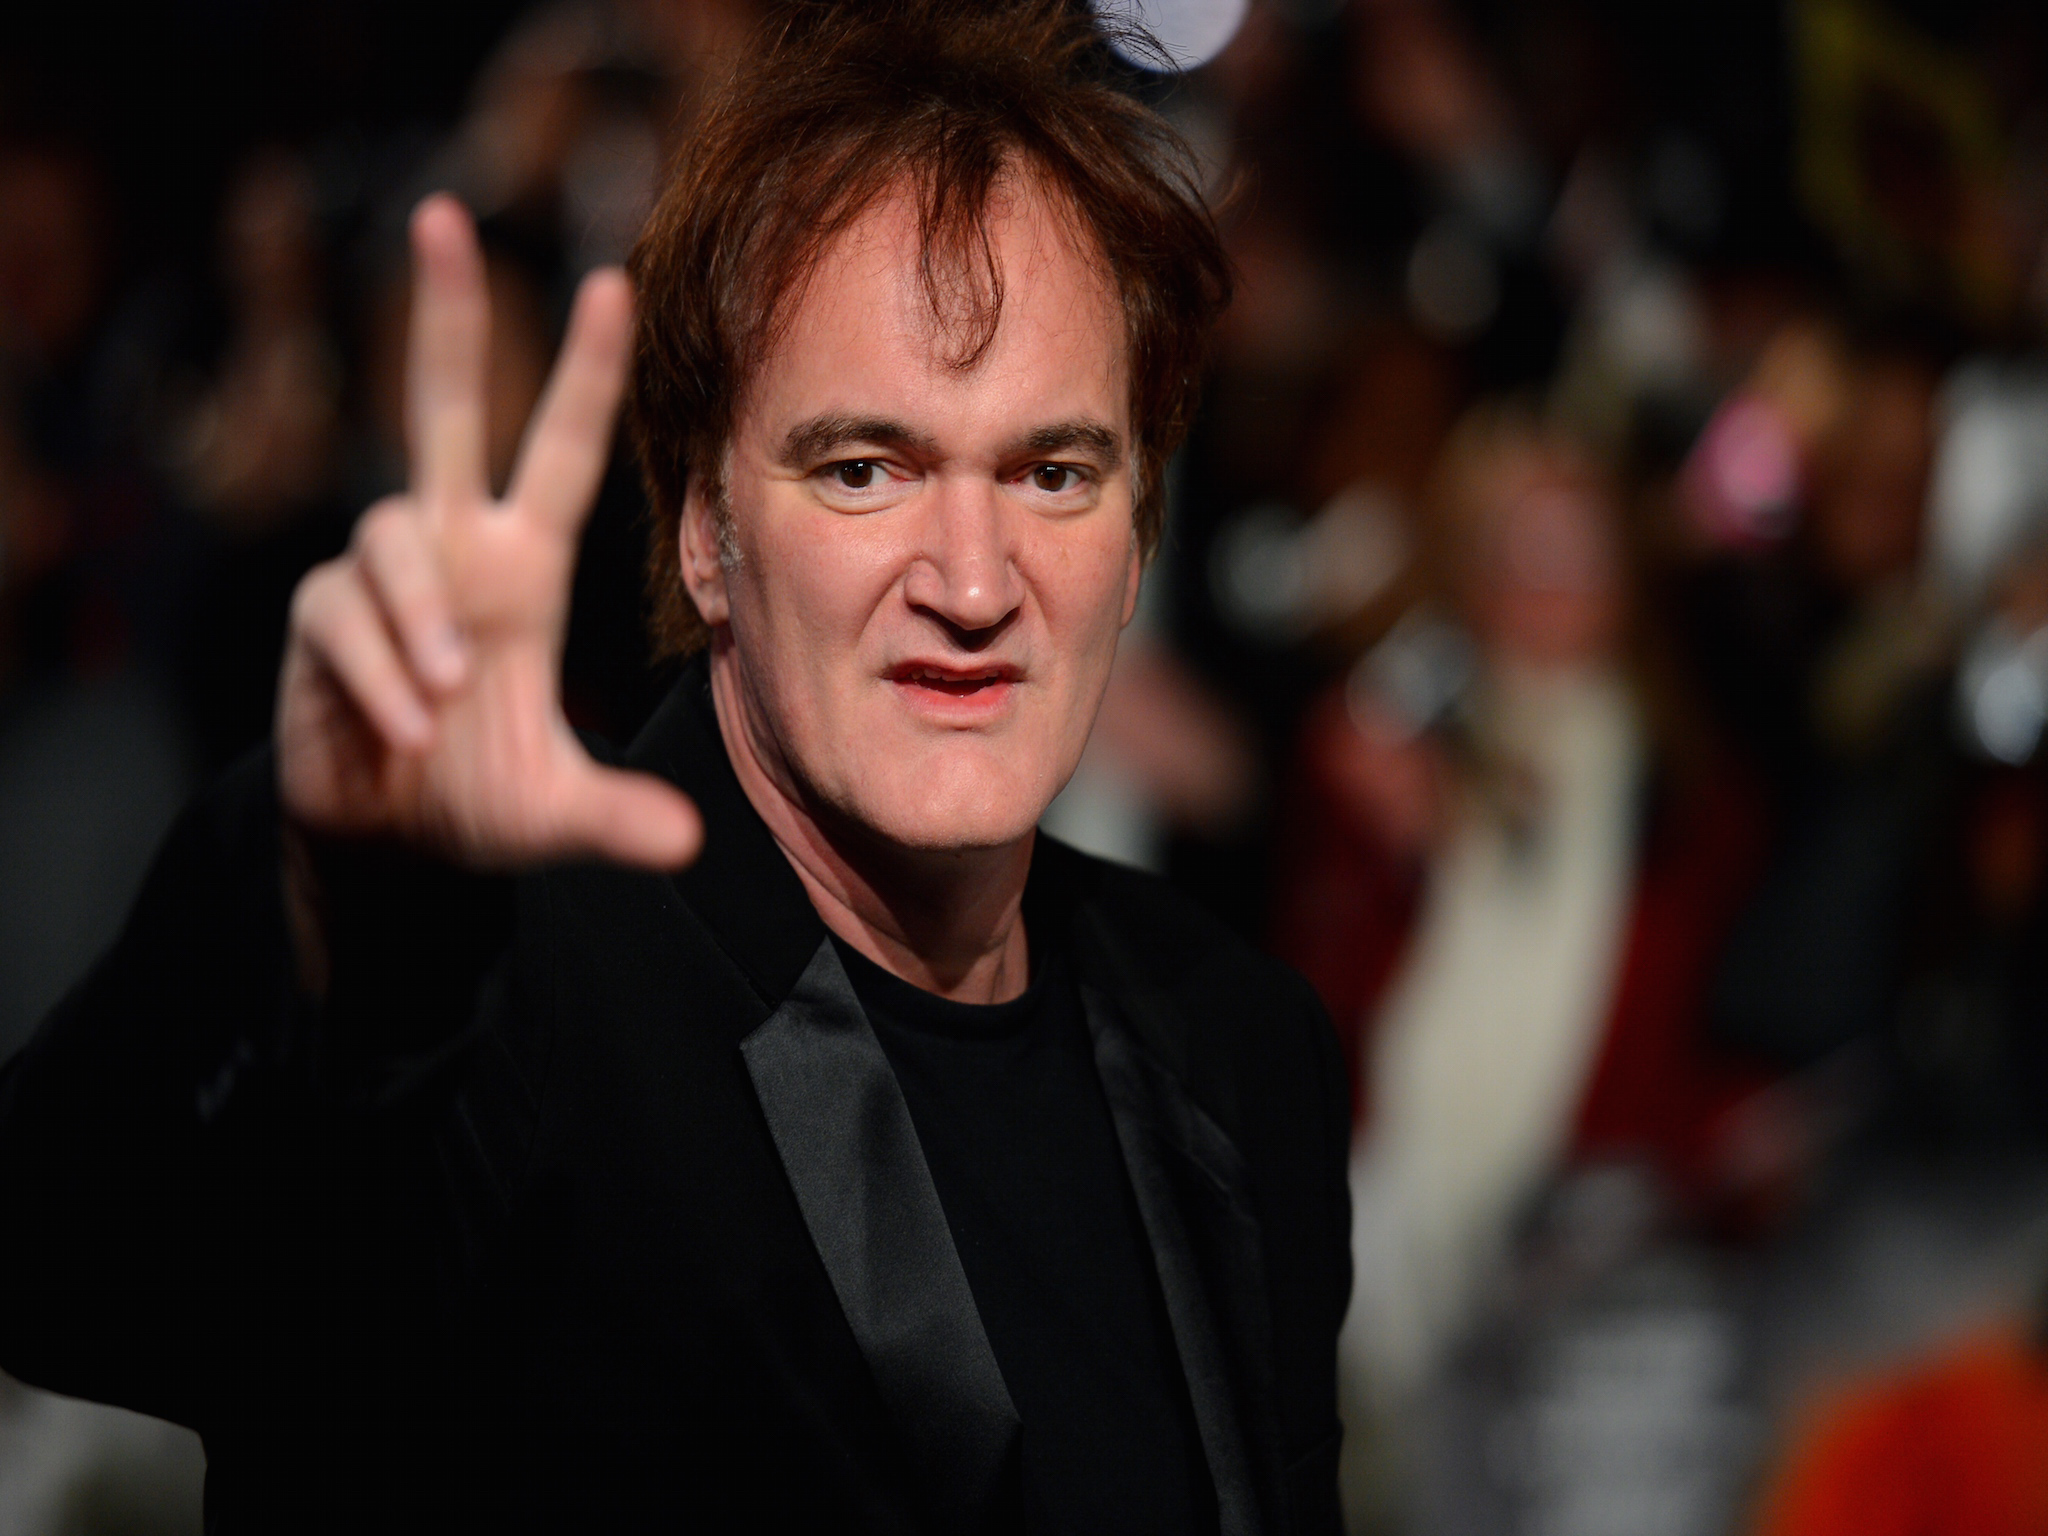 Thankfully, as the release of The Hateful Eight comes nearer, the controversy over Tarantino’s remarks about cops is receding